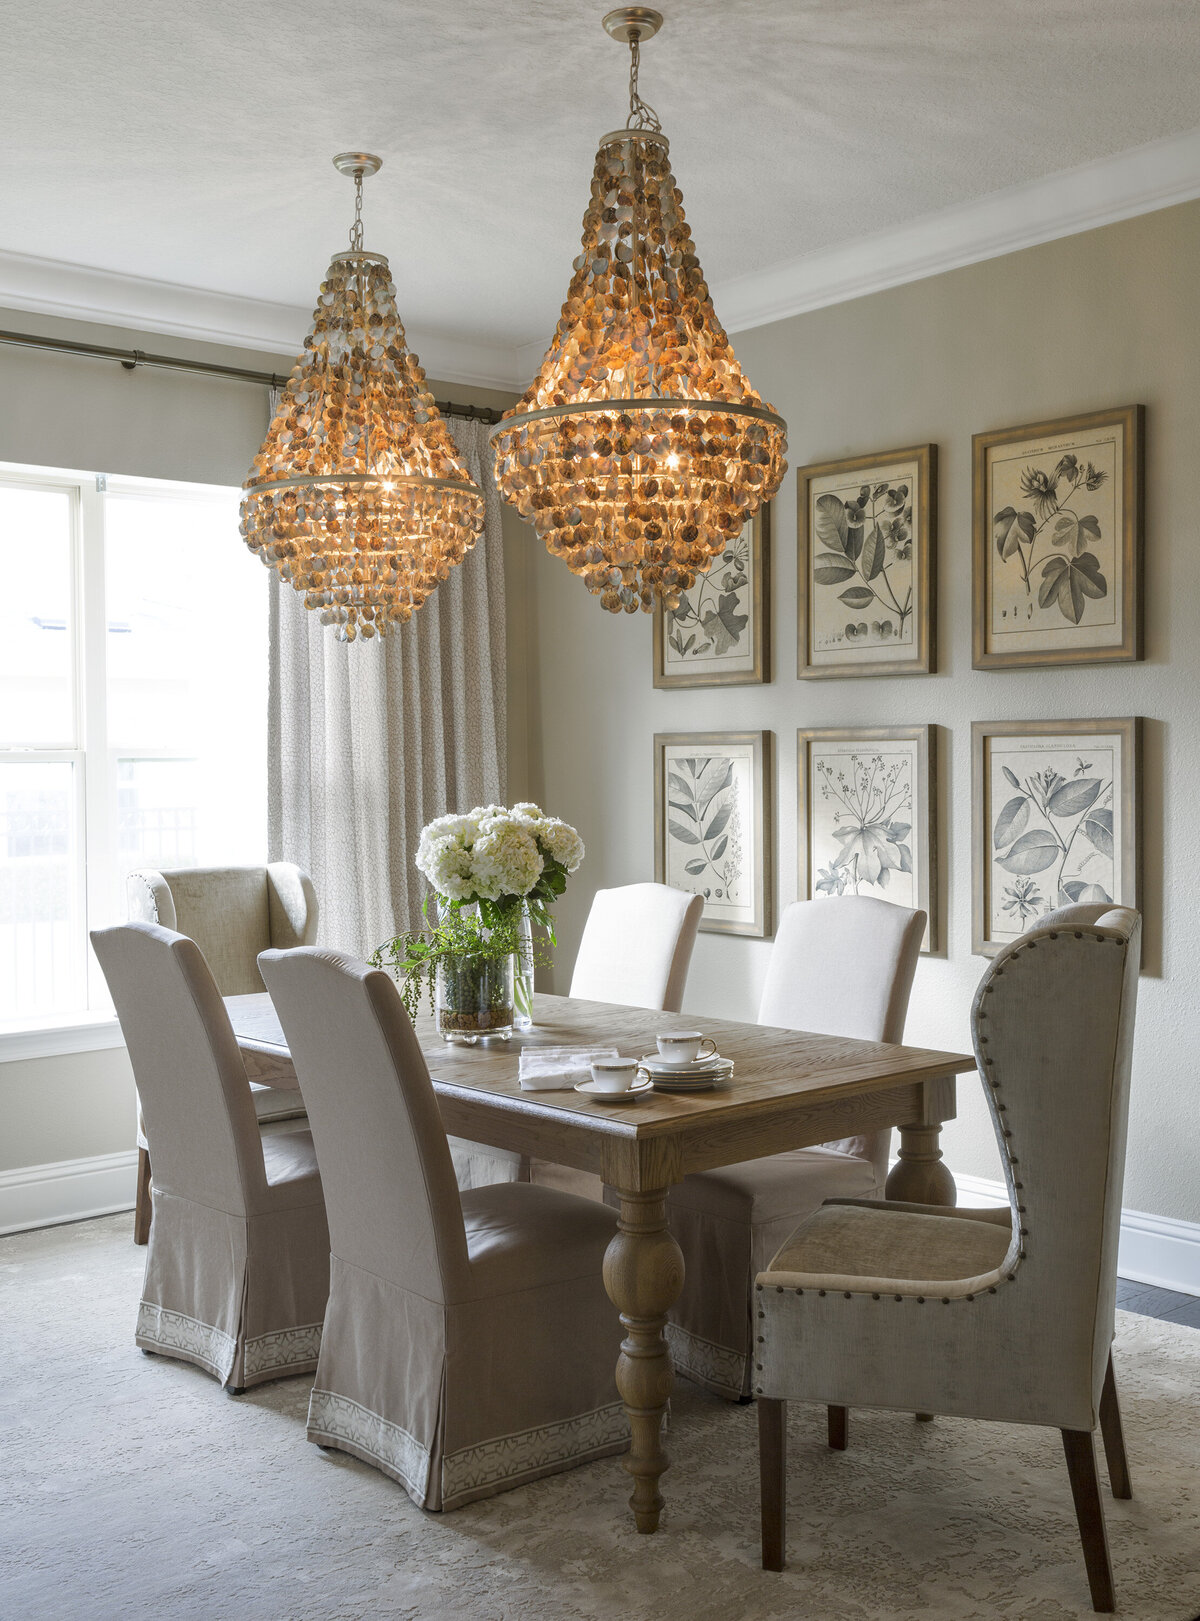 Modern Beige Color Dining Chairs and Wooden Table